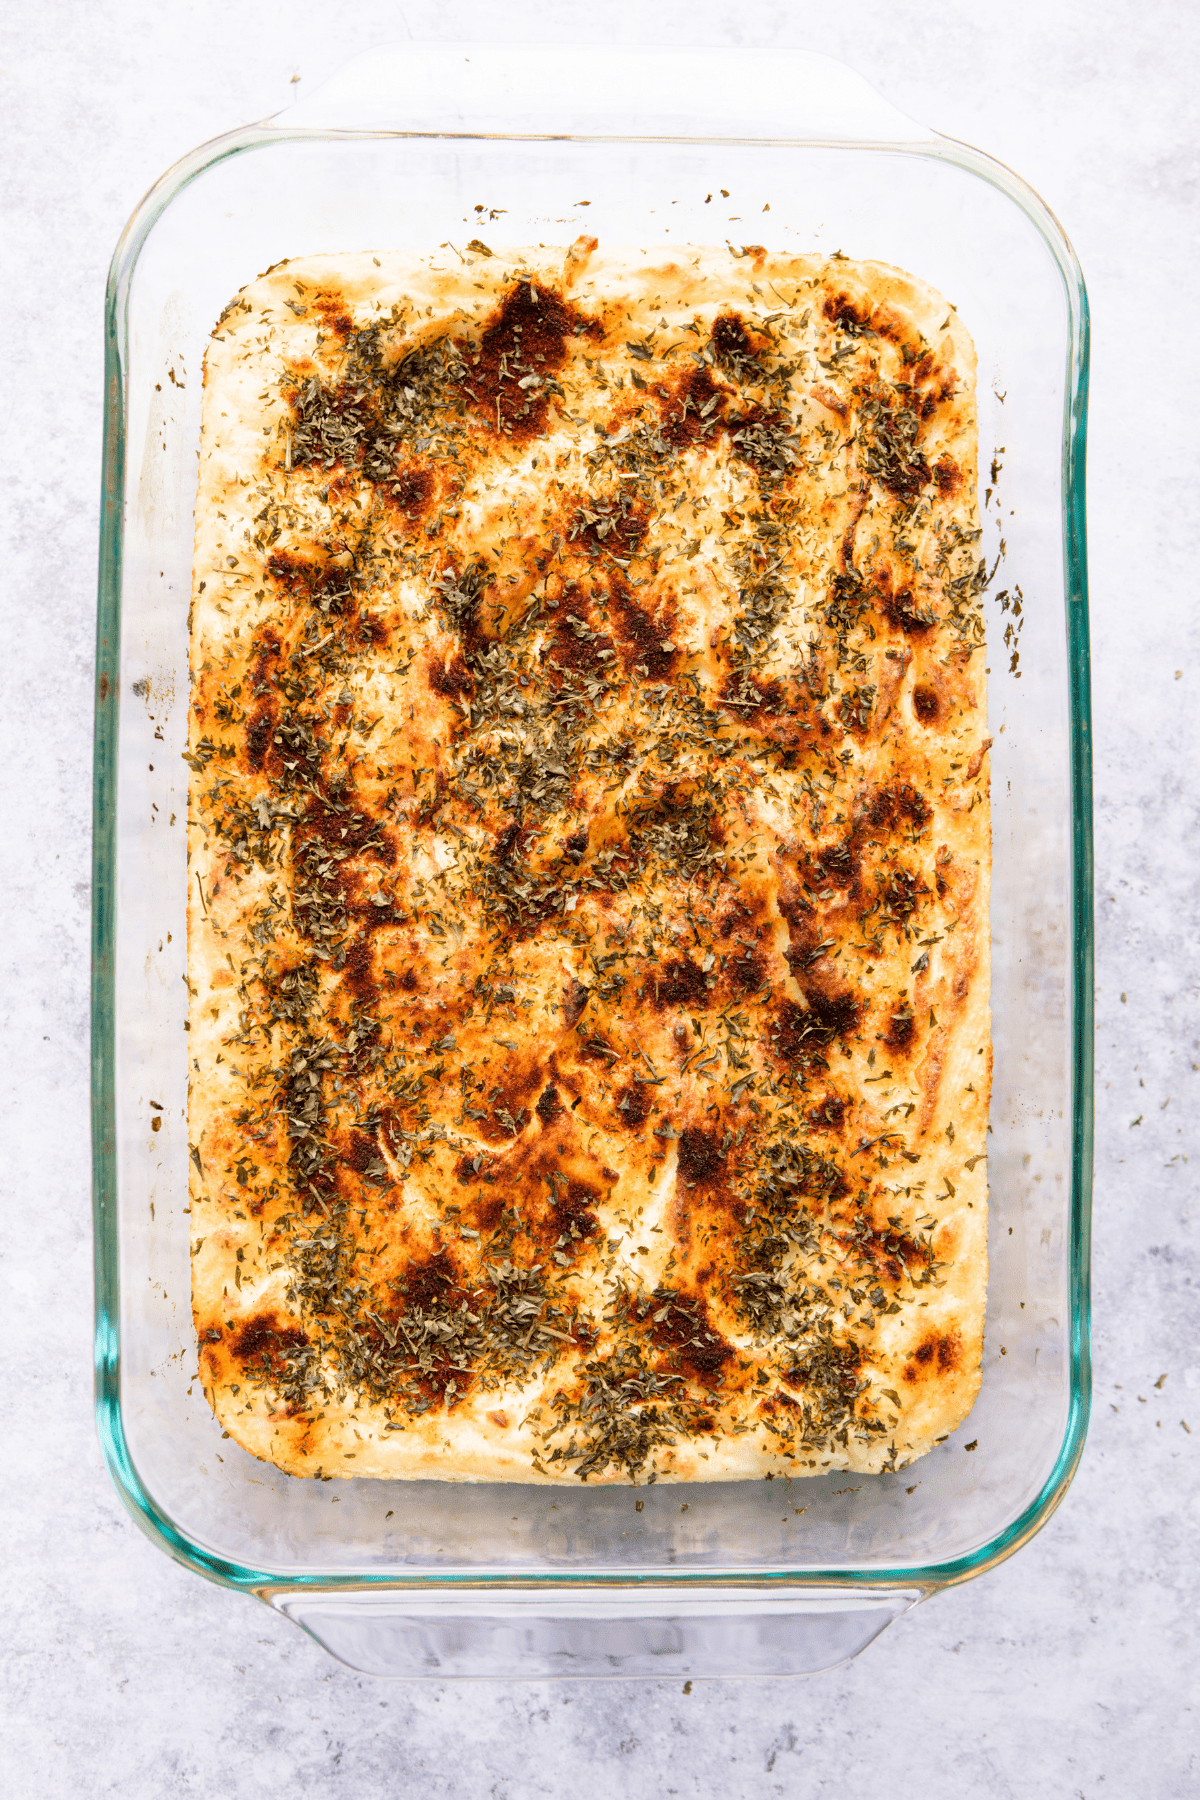 A tray of baked mashed potatoes with herbs.